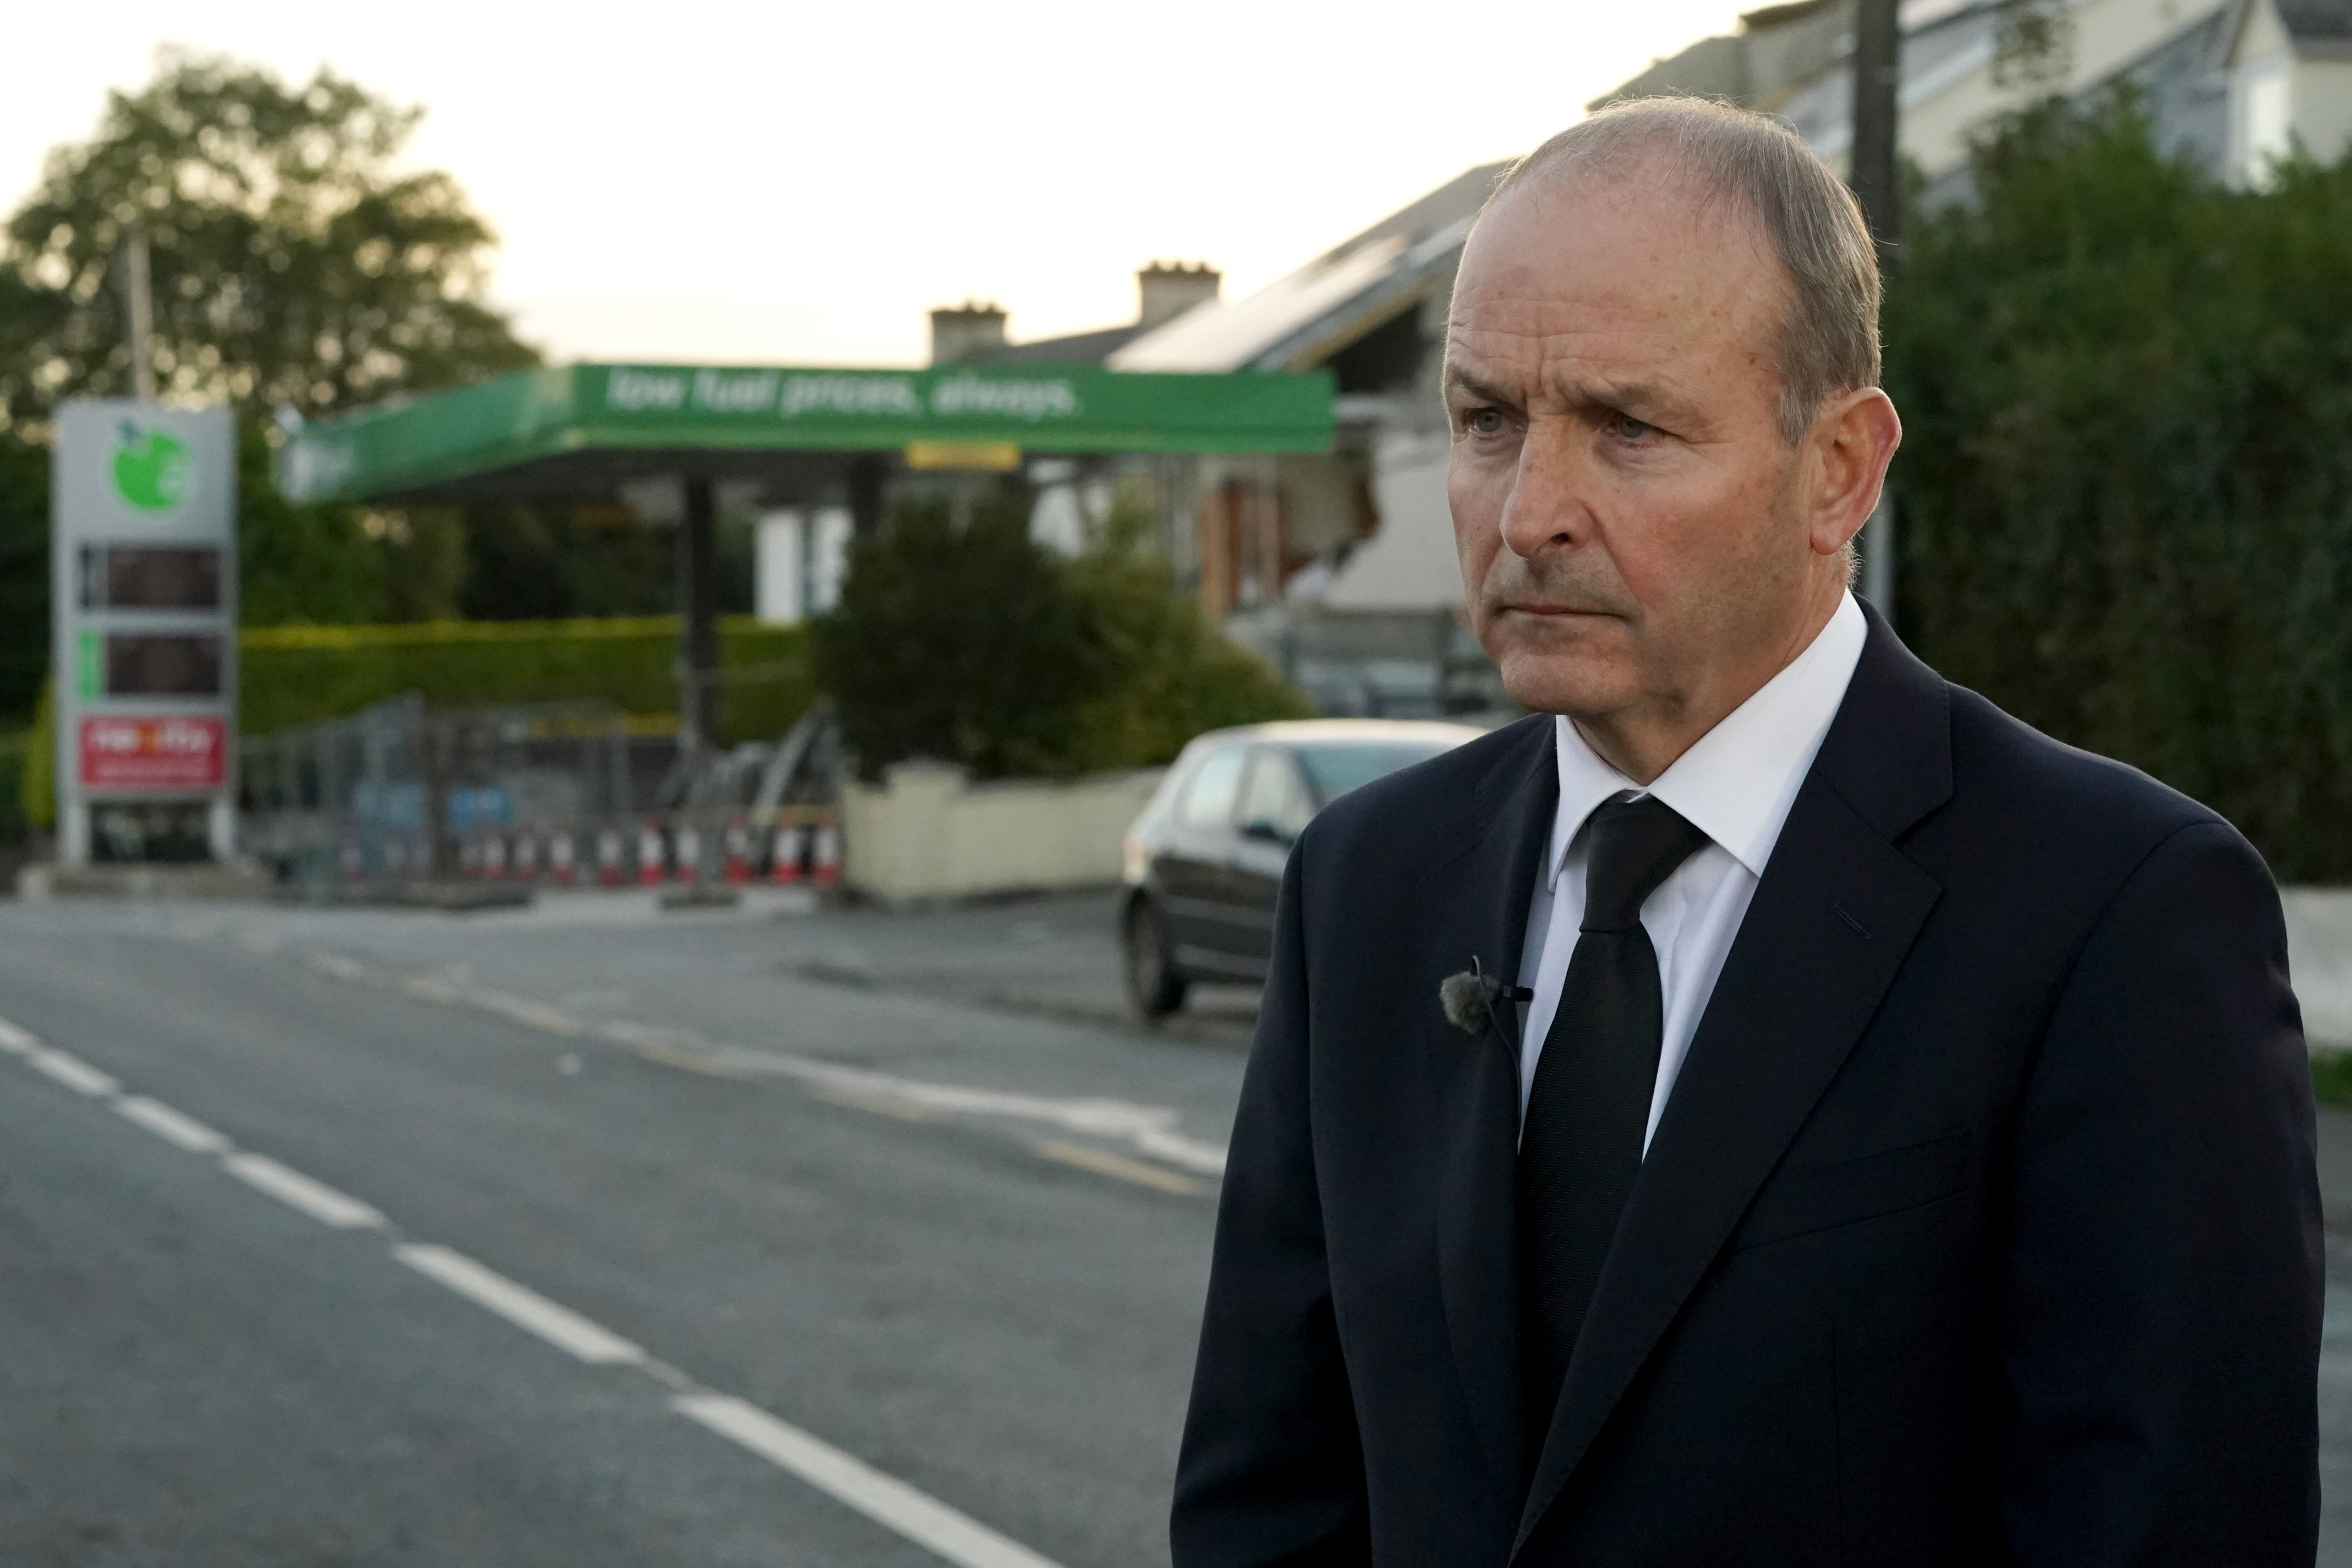 Taoiseach Micheal Martin visits the scene of the explosion